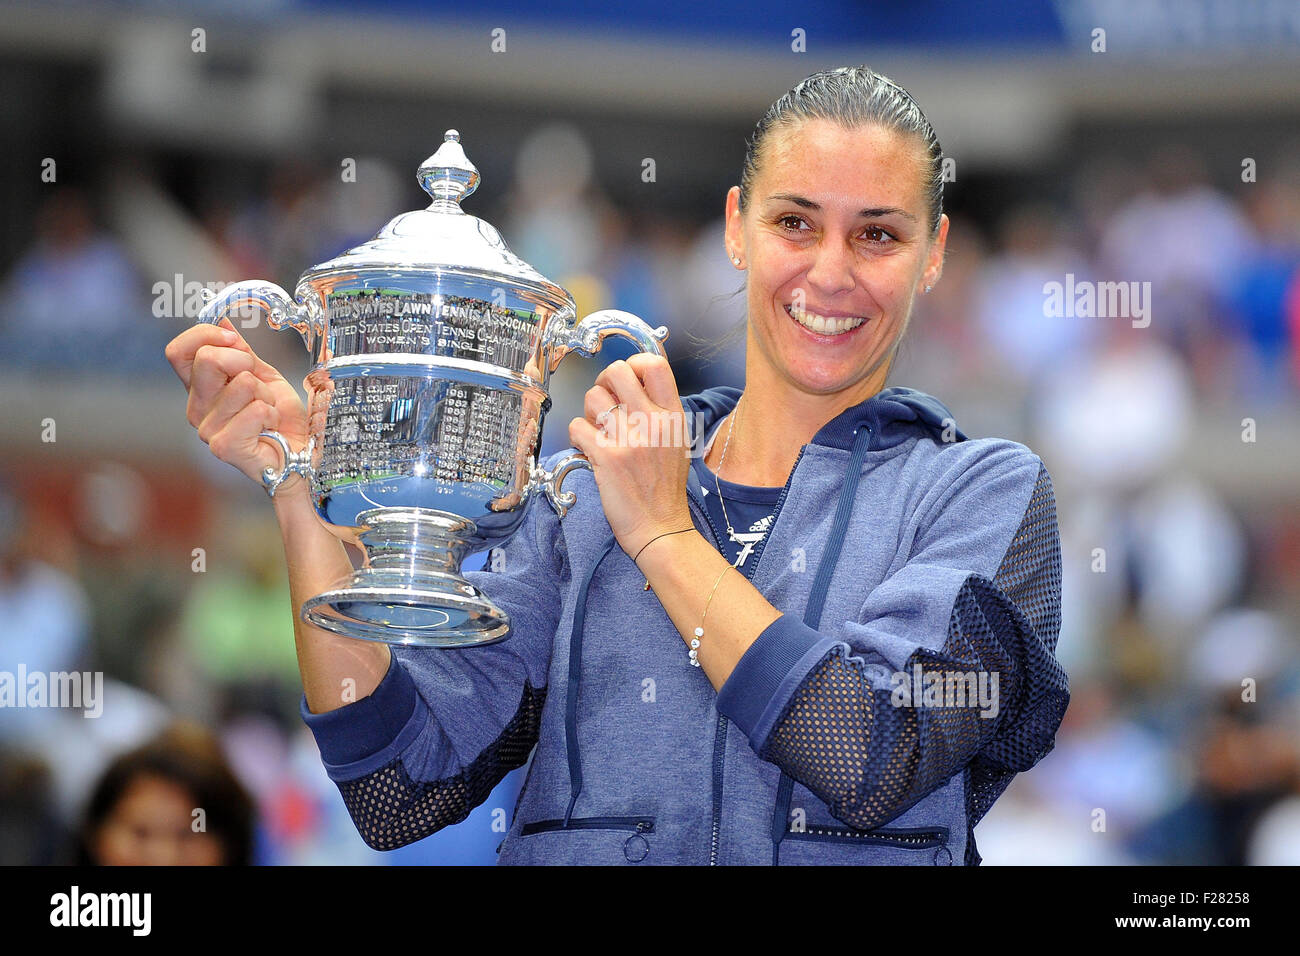 Flushing Meadows, New York, USA. 12th Sep, 2015. US Open Tennis Championships. Womens Singles final. Pennetta versus Vinci. Flavia Pennetta (ITA) won the final 7-6 (7-4) 6-2 and then announced her intention to retire at season end © Action Plus Sports/Alamy Live News Stock Photo